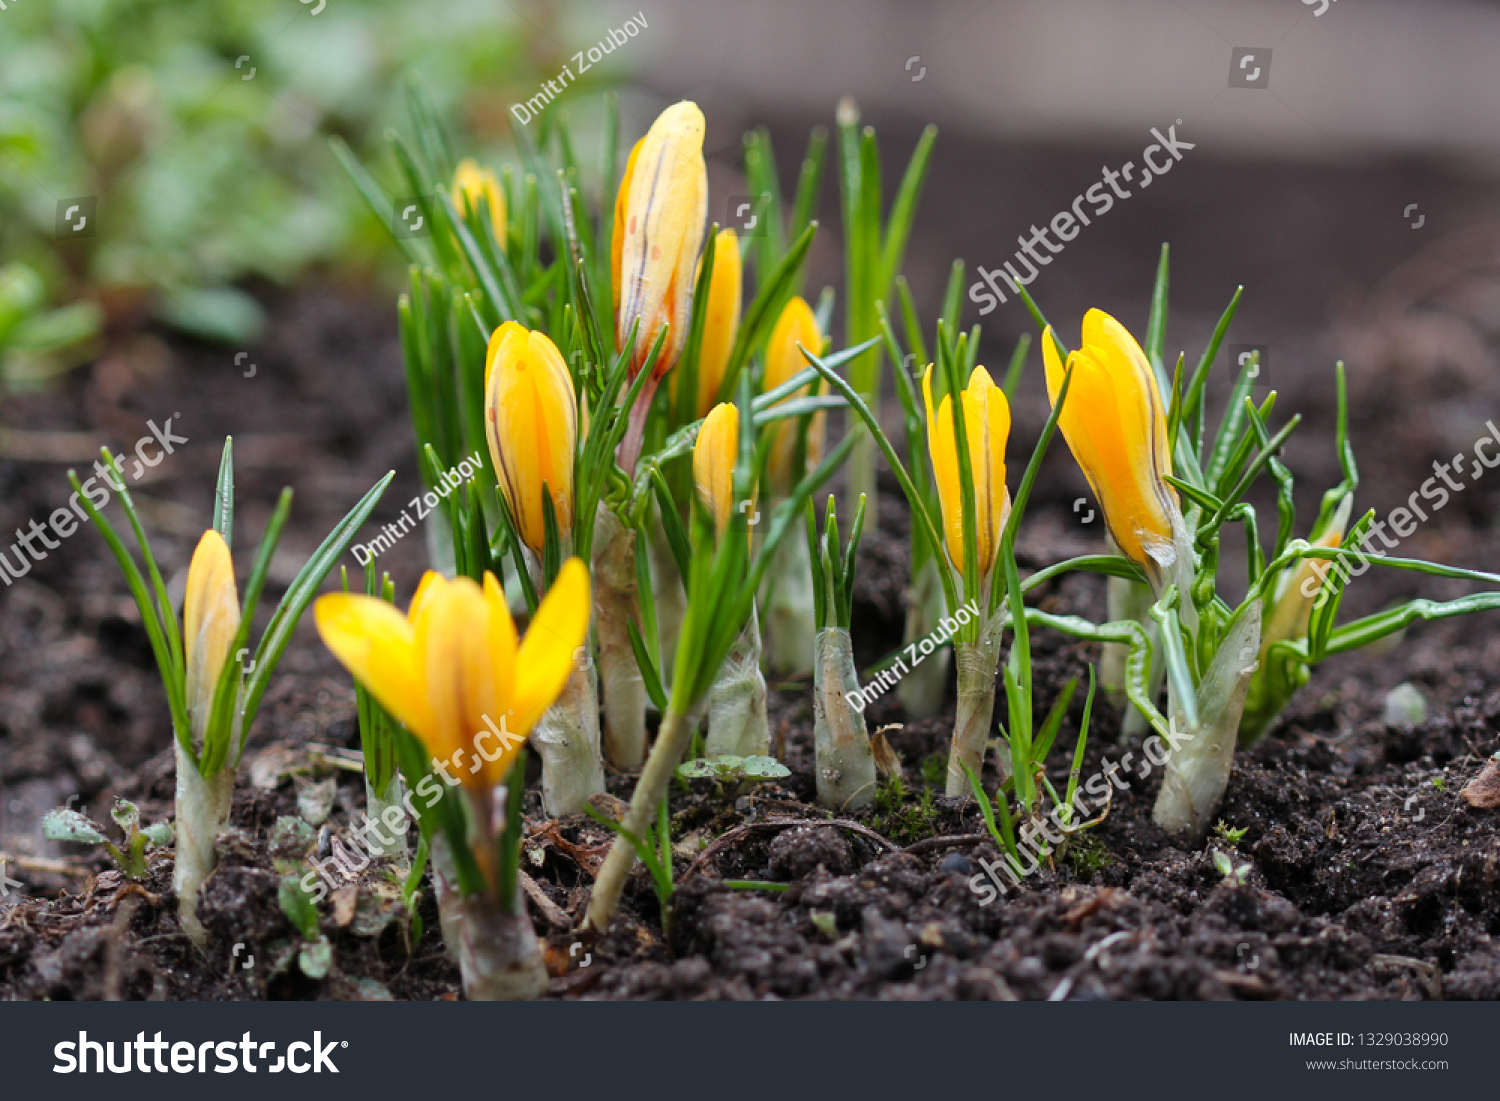 Yellow crocus flowers naturally growing in early spring #1329038990